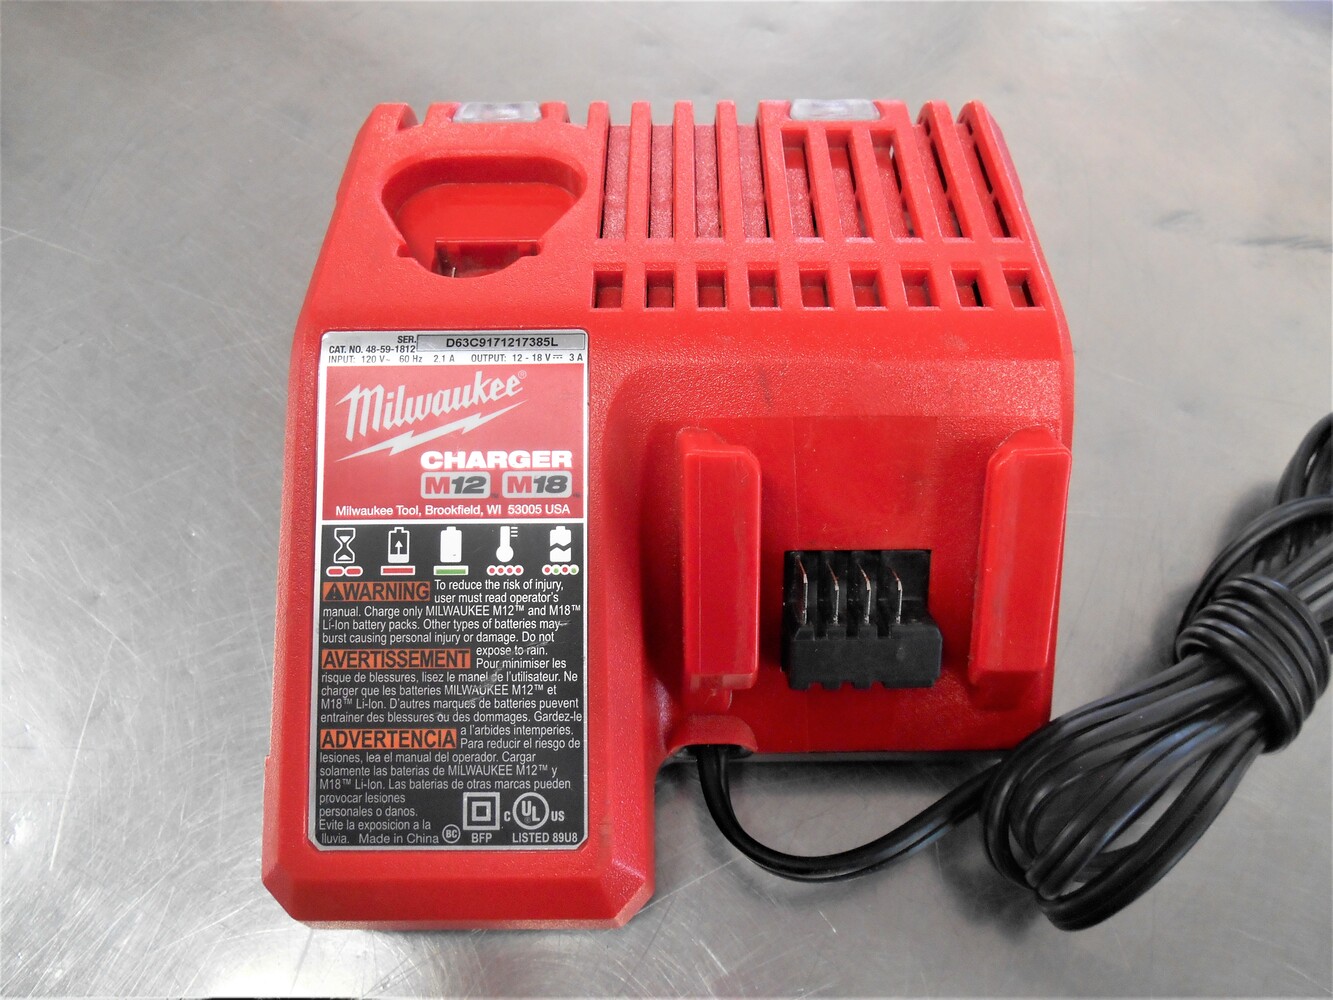 Milwaukee M12/M18 12-Volt/18-Volt Lithium-Ion Multi-Voltage Battery and Charger 